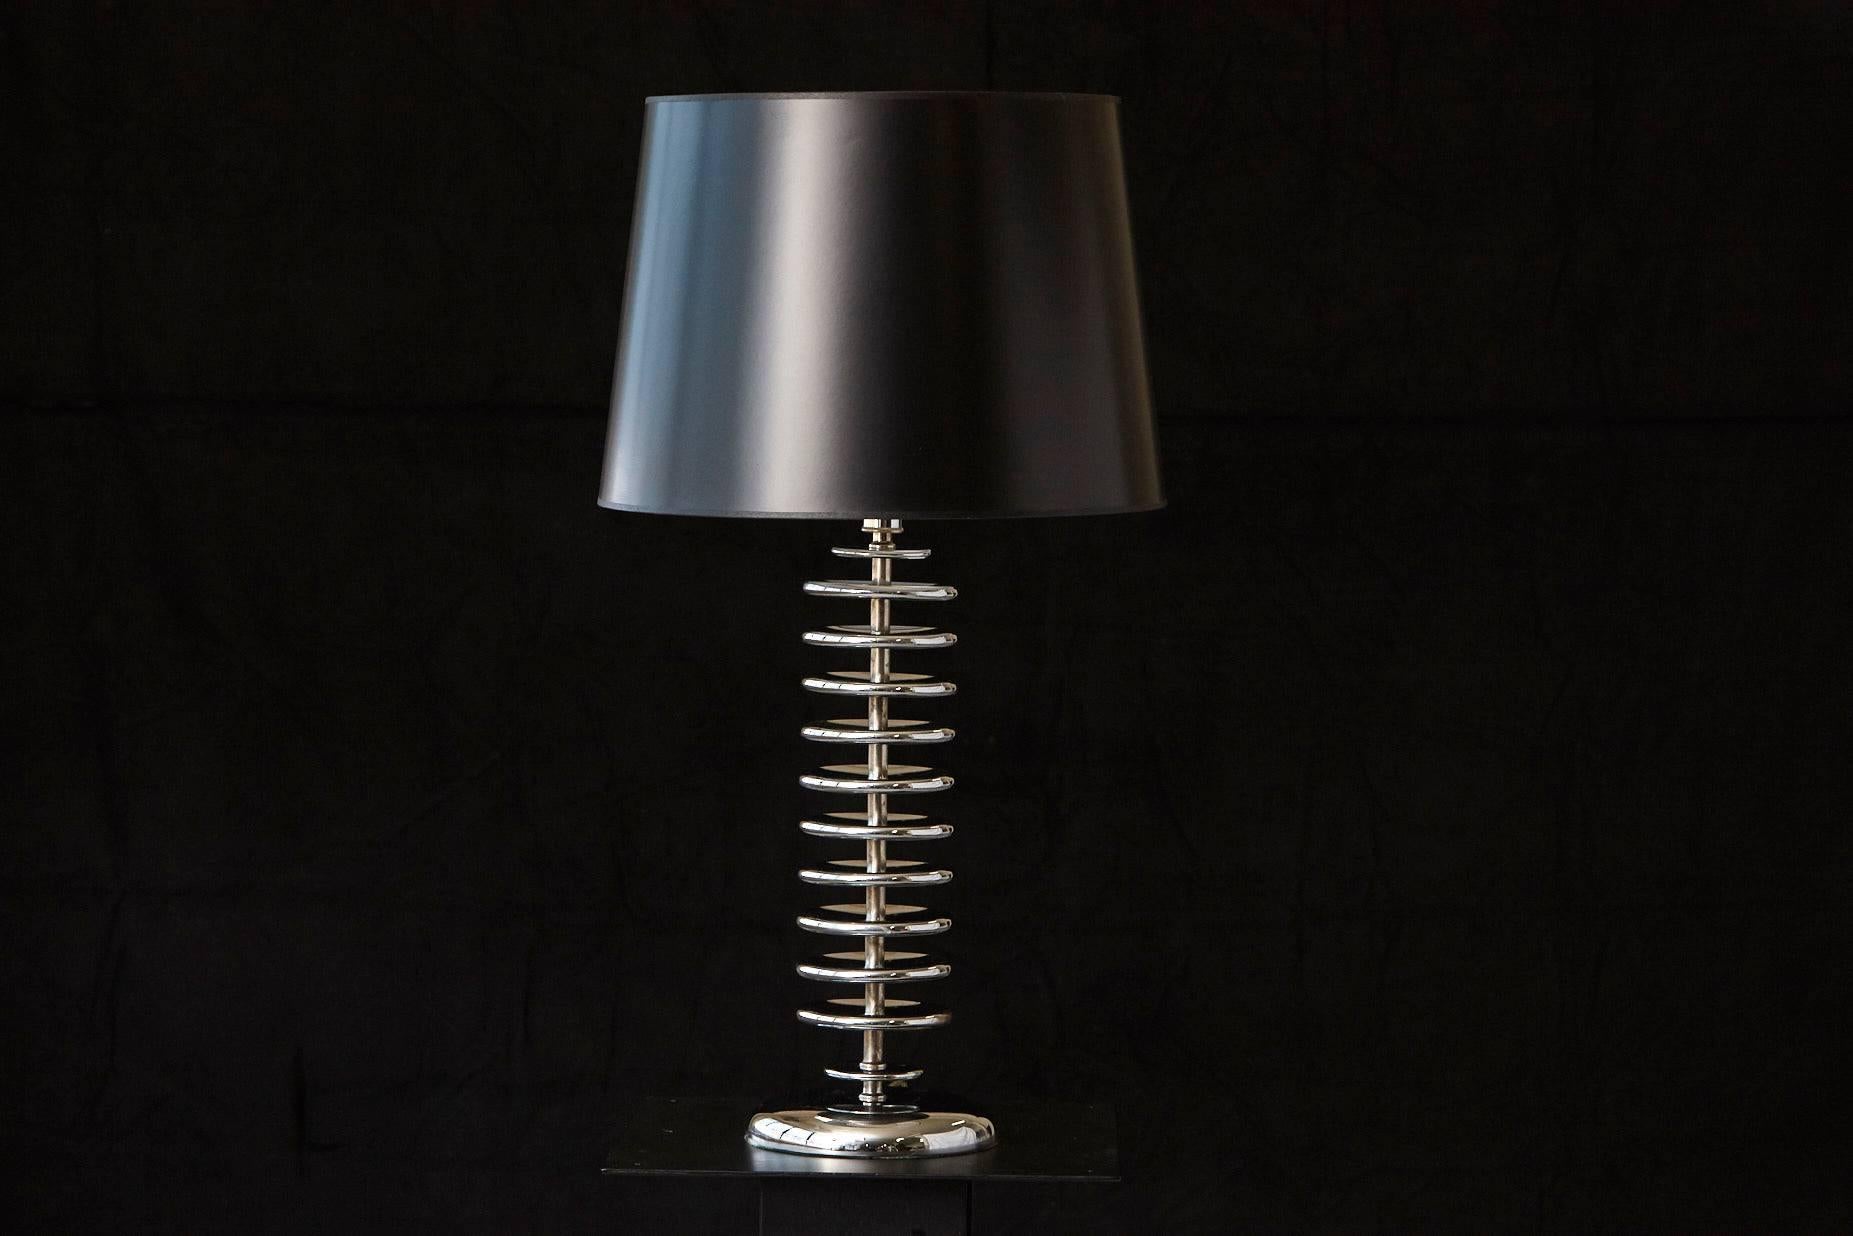 Eye catching stacked chrome disc table lamp with new black or silver lining shade. Chrome is in excellent condition.
Height to finial 33.5 in.